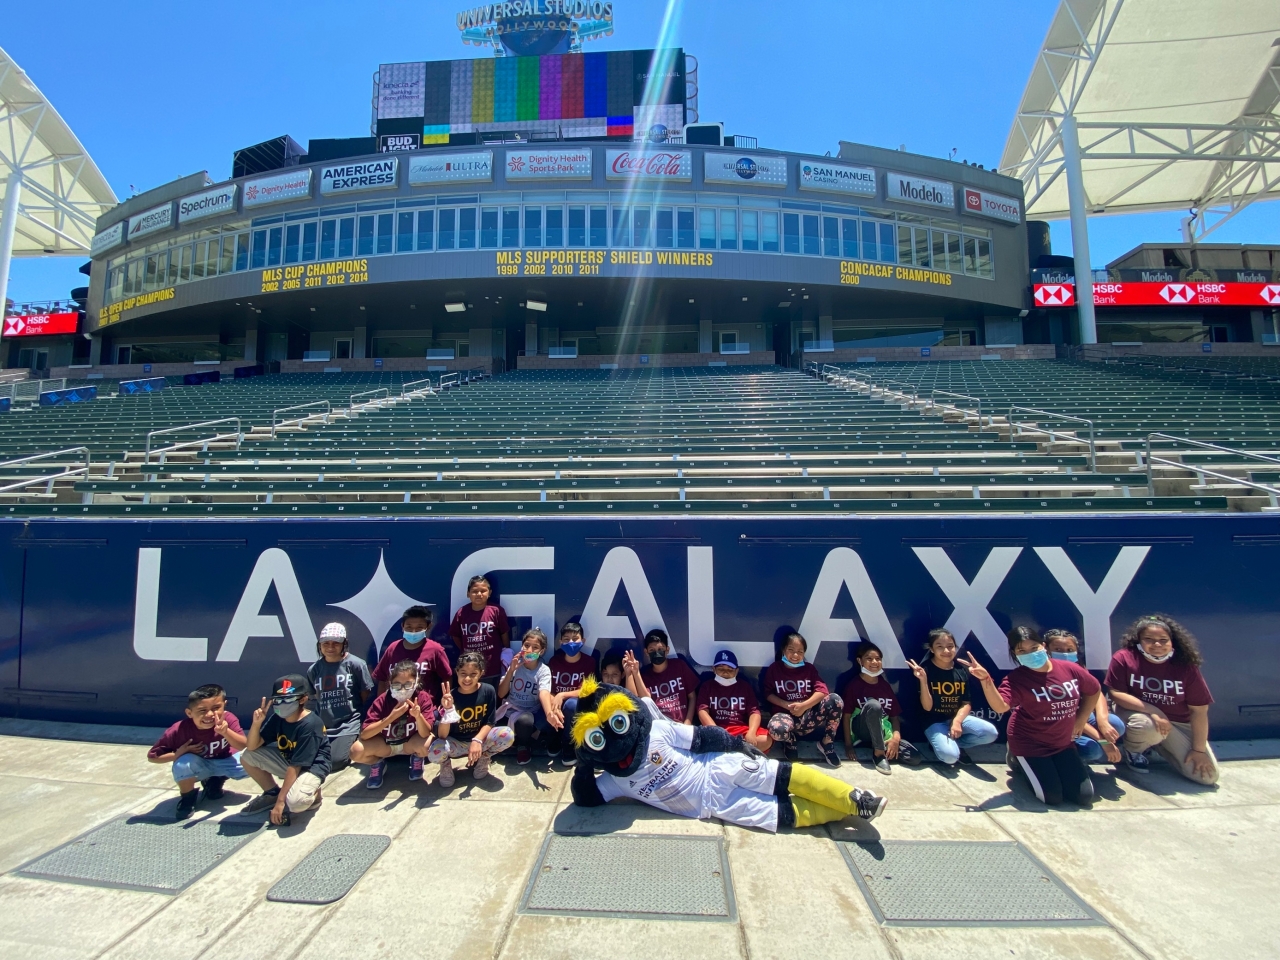 Youth participants enrolled in the Hope Street summer program spend the afternoon enjoying a specially designed LA Galaxy Youth Soccer Clinic, working directly with club coaching staff and LA Galaxy mascot Cozmo at Dignity Health Sports Park on June 25, 2021.